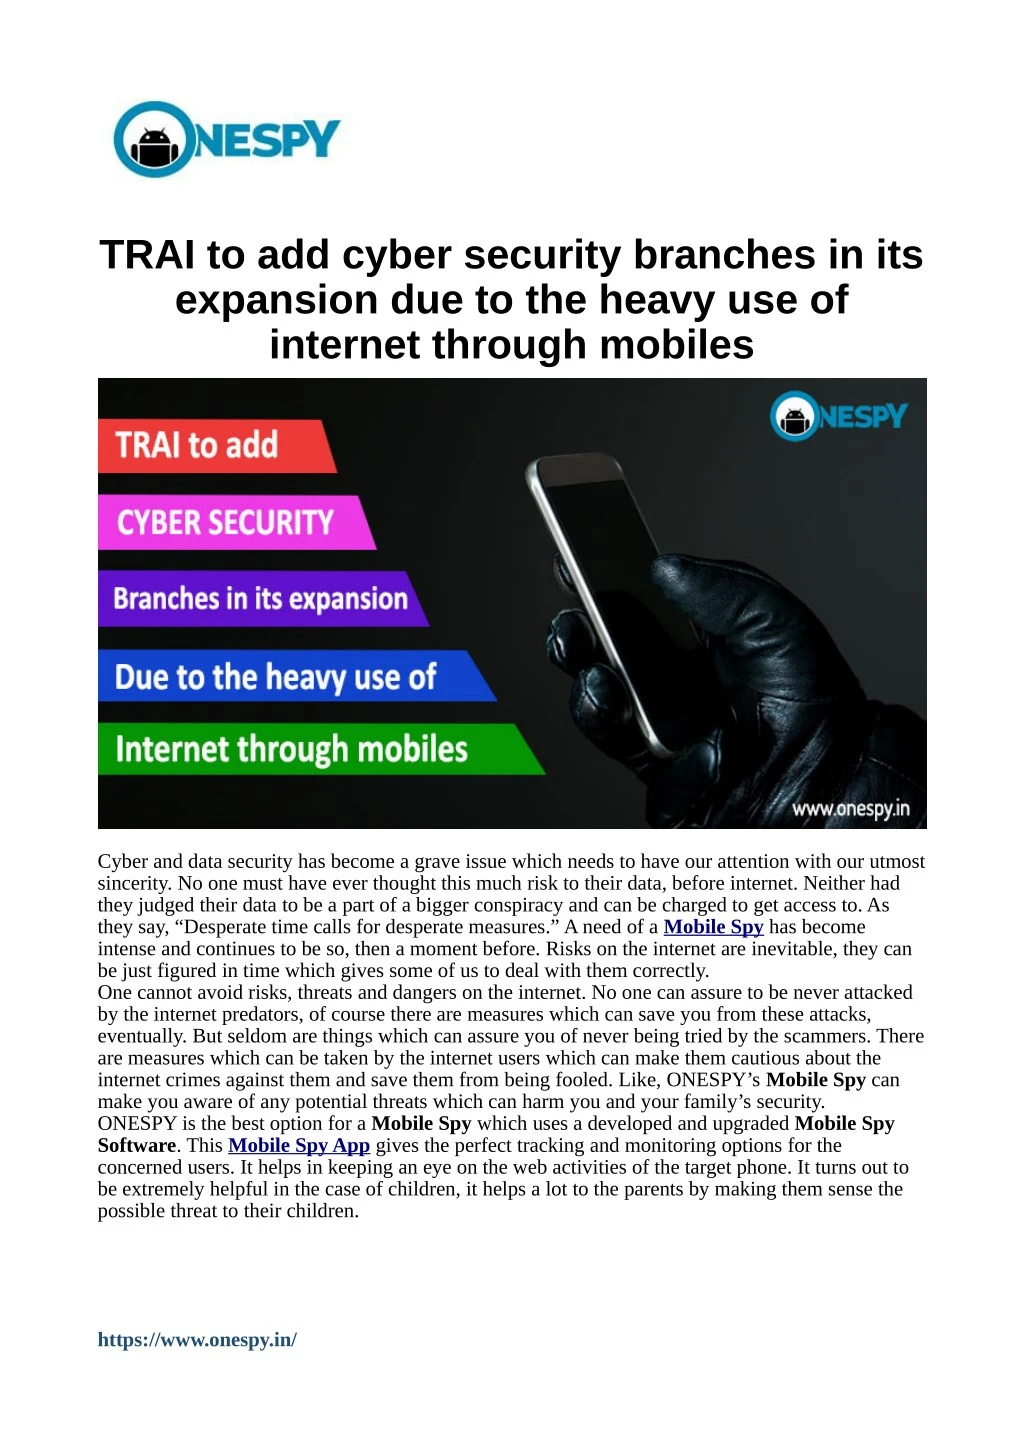 trai to add cyber security branches